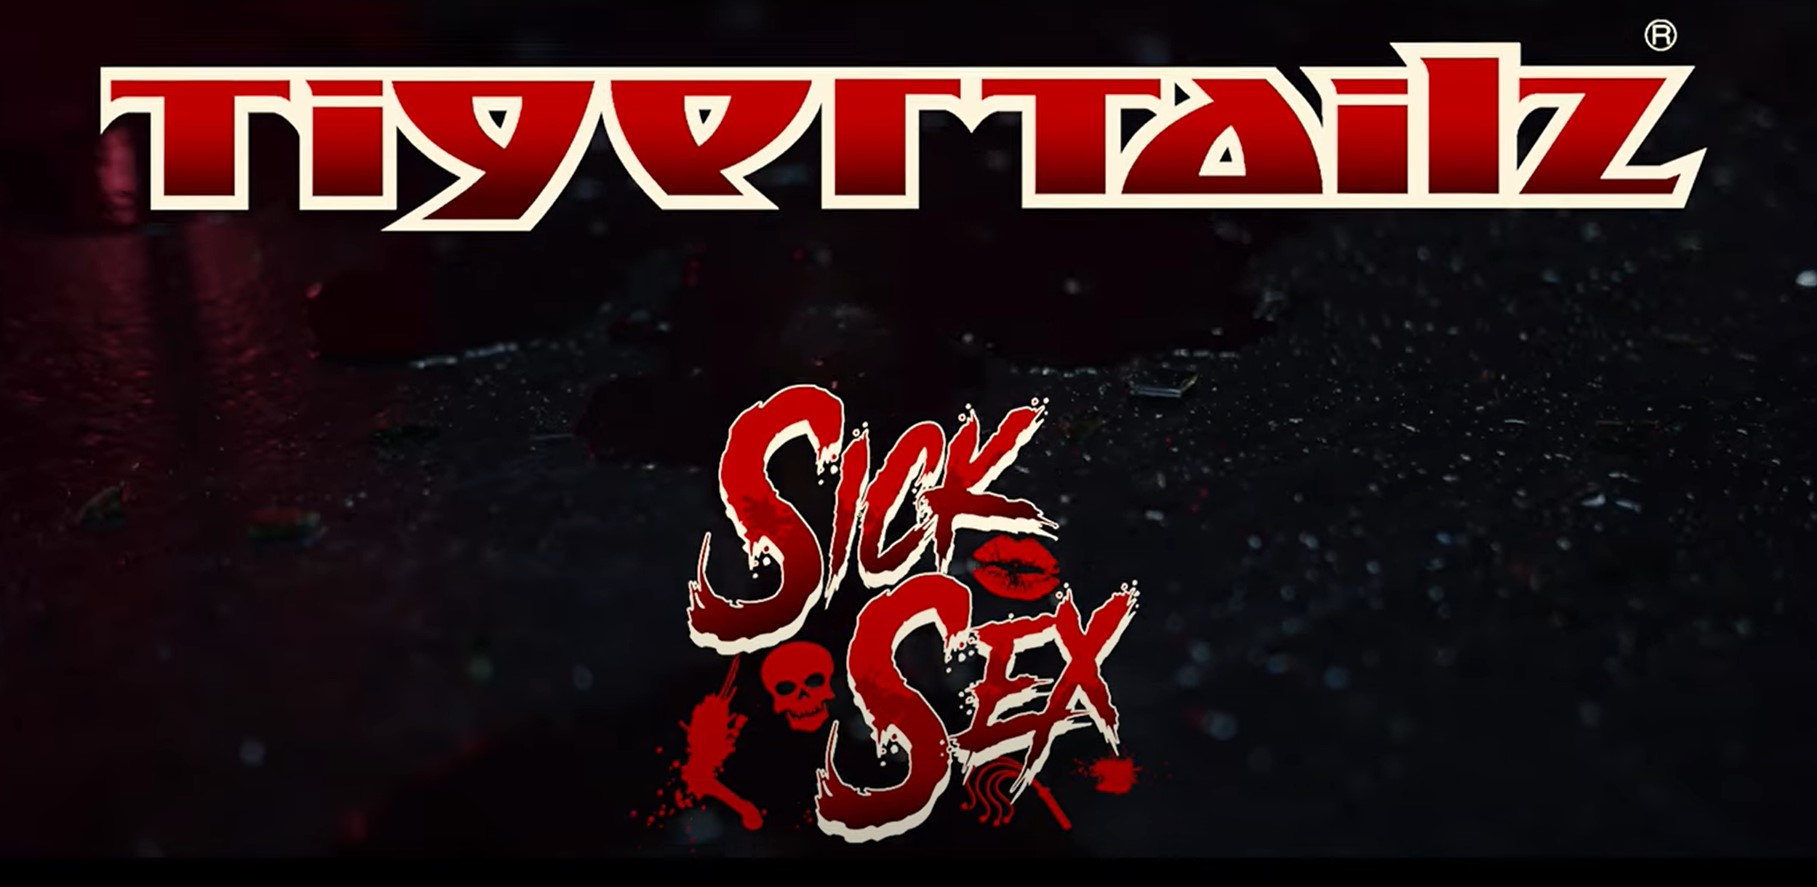 Watch New Tigertailz Video For "Sick Sex" Featuring New Singer Ashley Edison